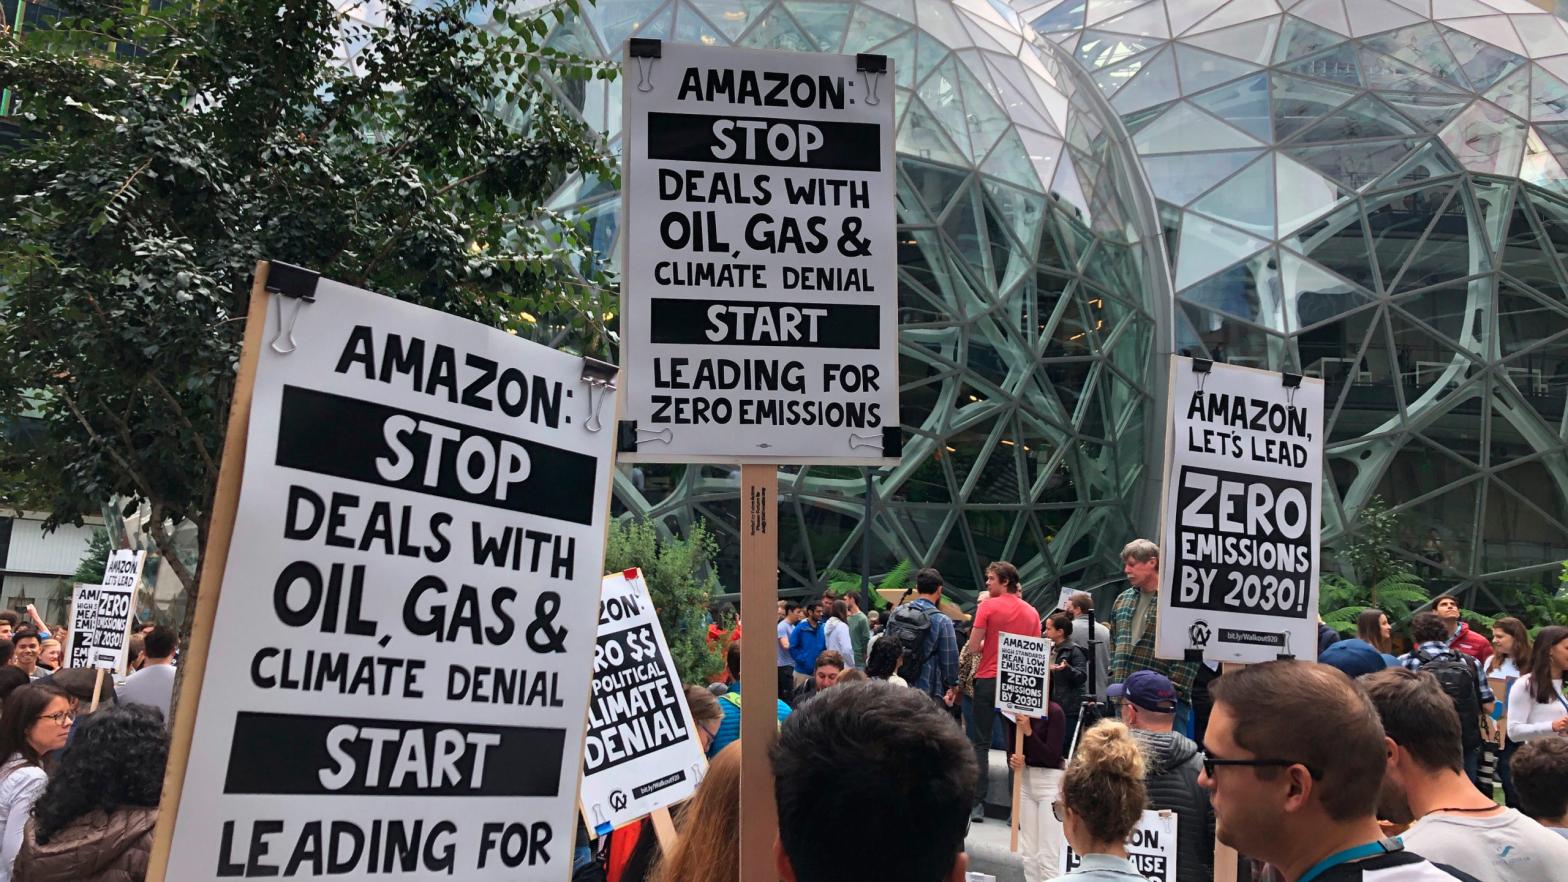 Amazon workers begin to gather in front of the Spheres, participating in the climate strike Friday, Sept. 20, 2019, in Seattle. (Photo: Elaine Thompson, AP)